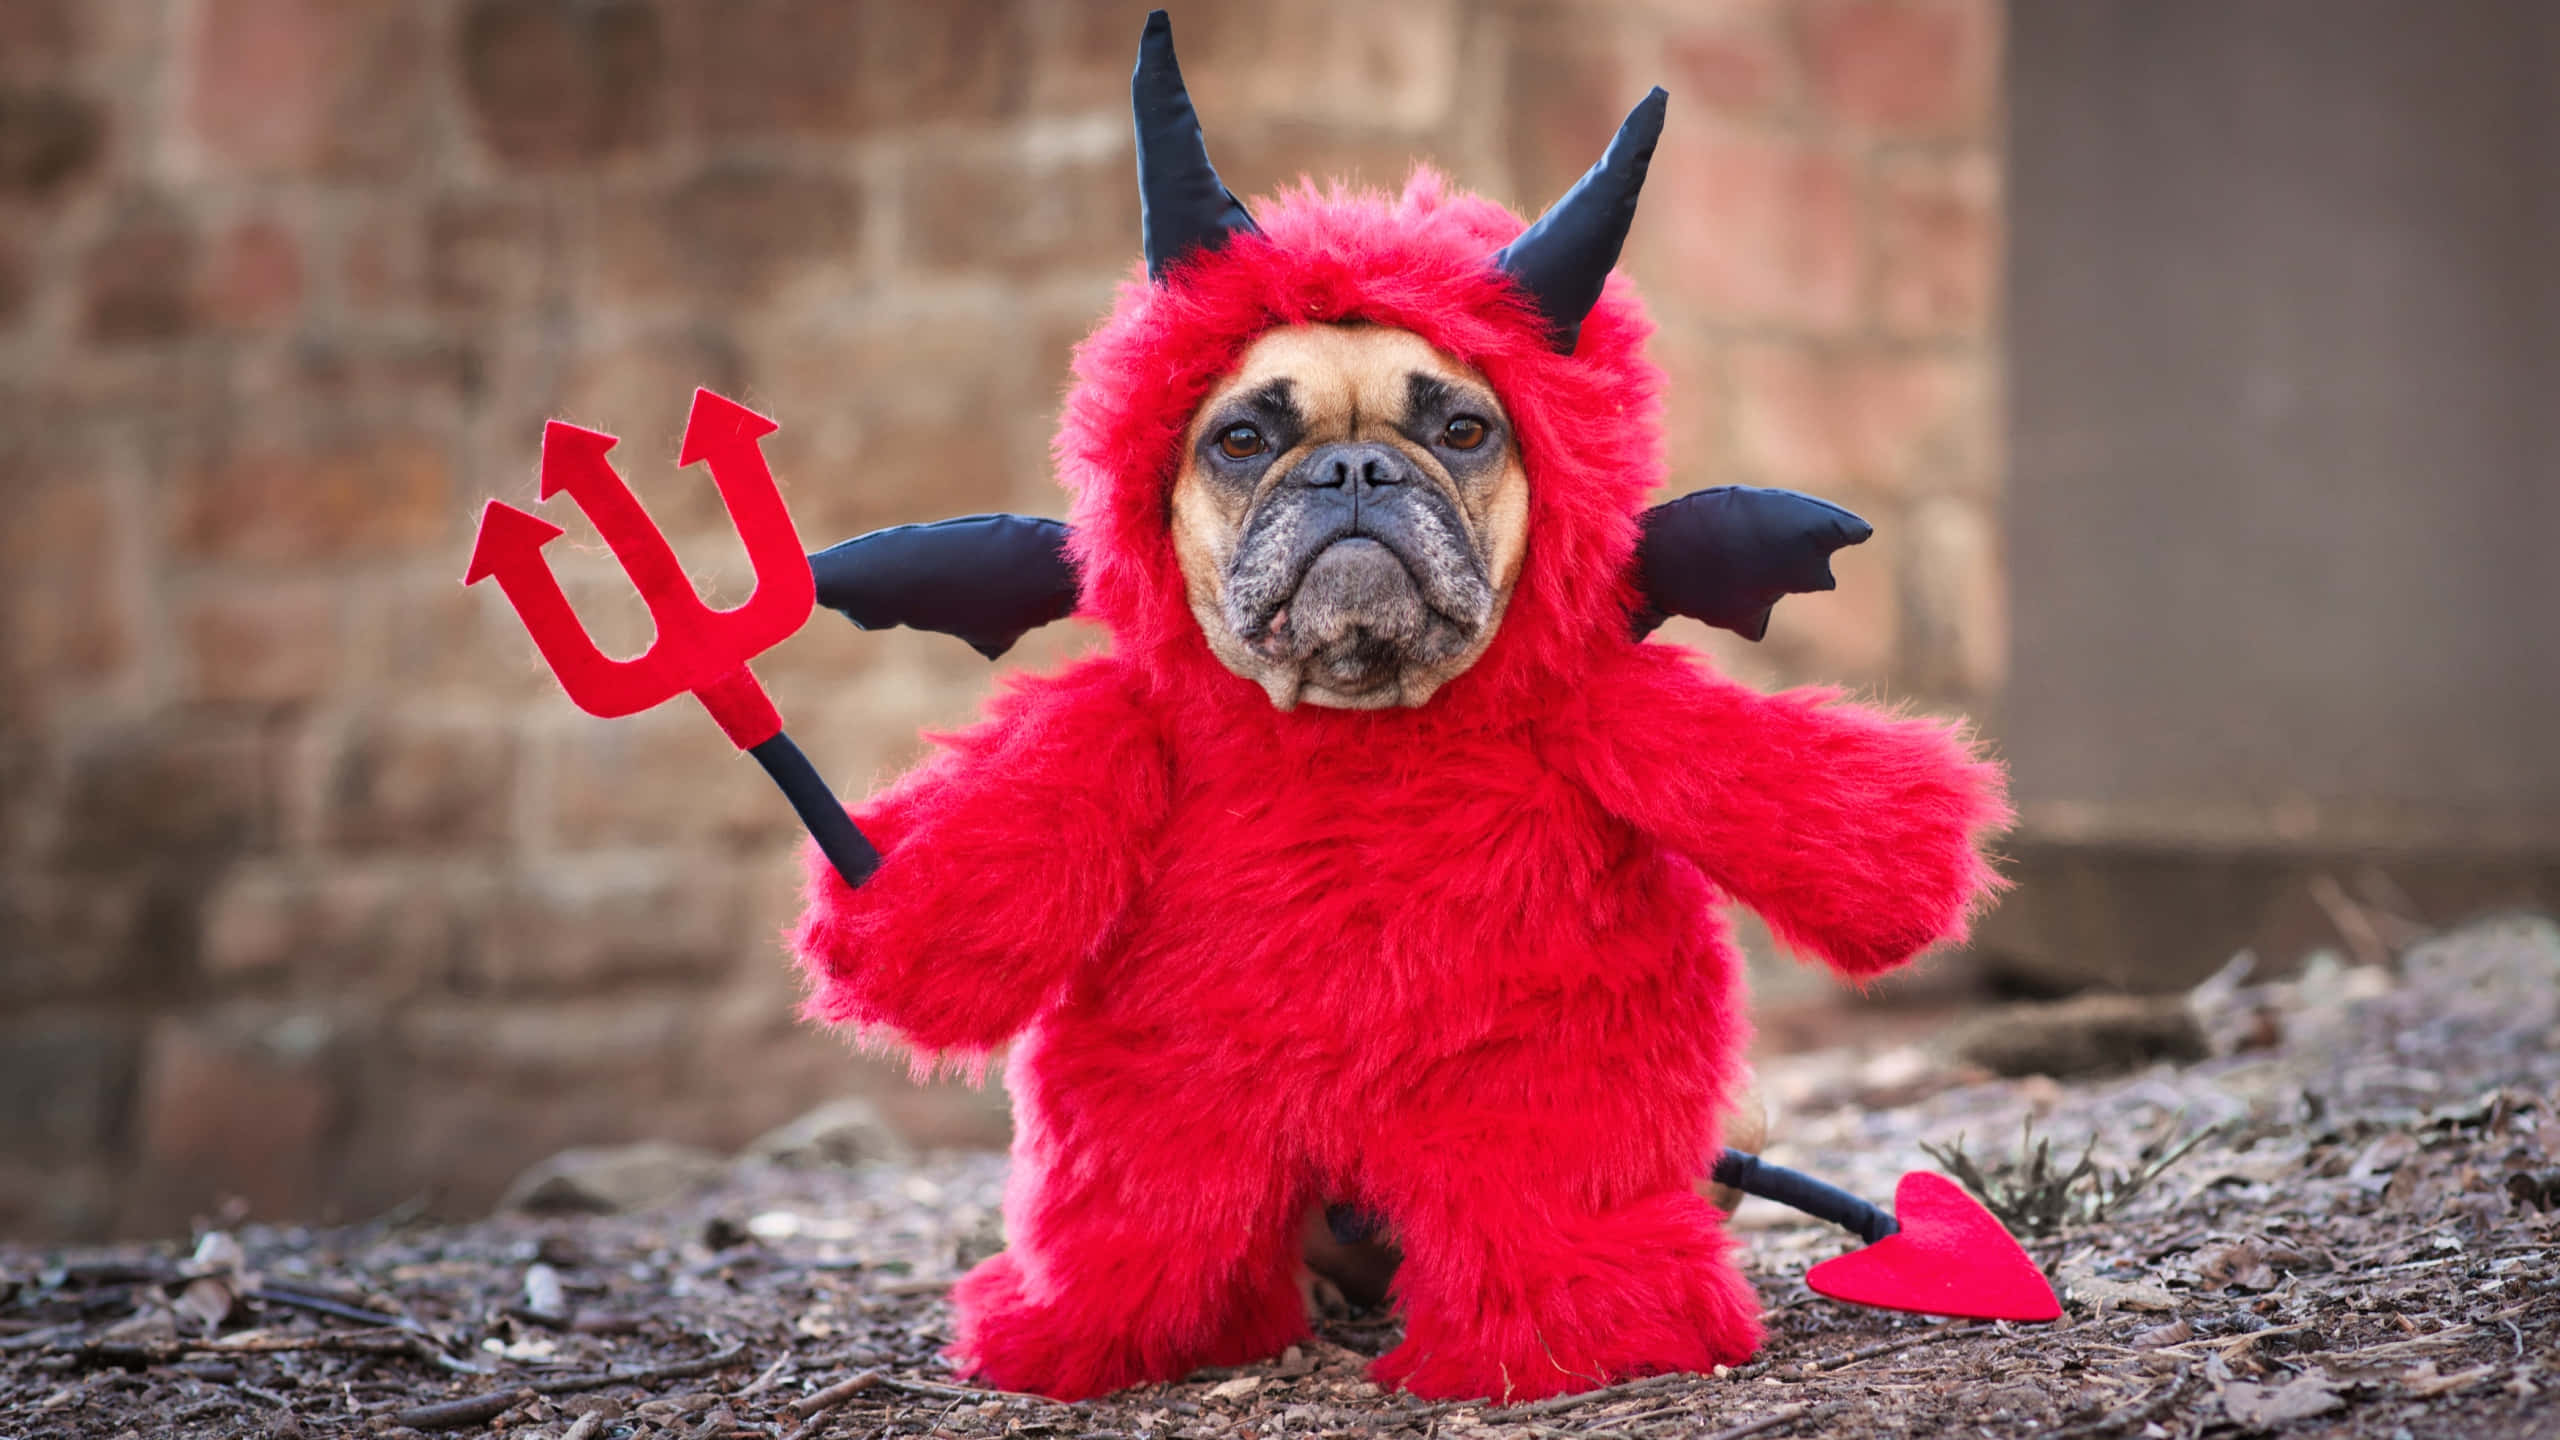 Get into the spooky spirit this Halloween season with these adorable pet costumes! Wallpaper